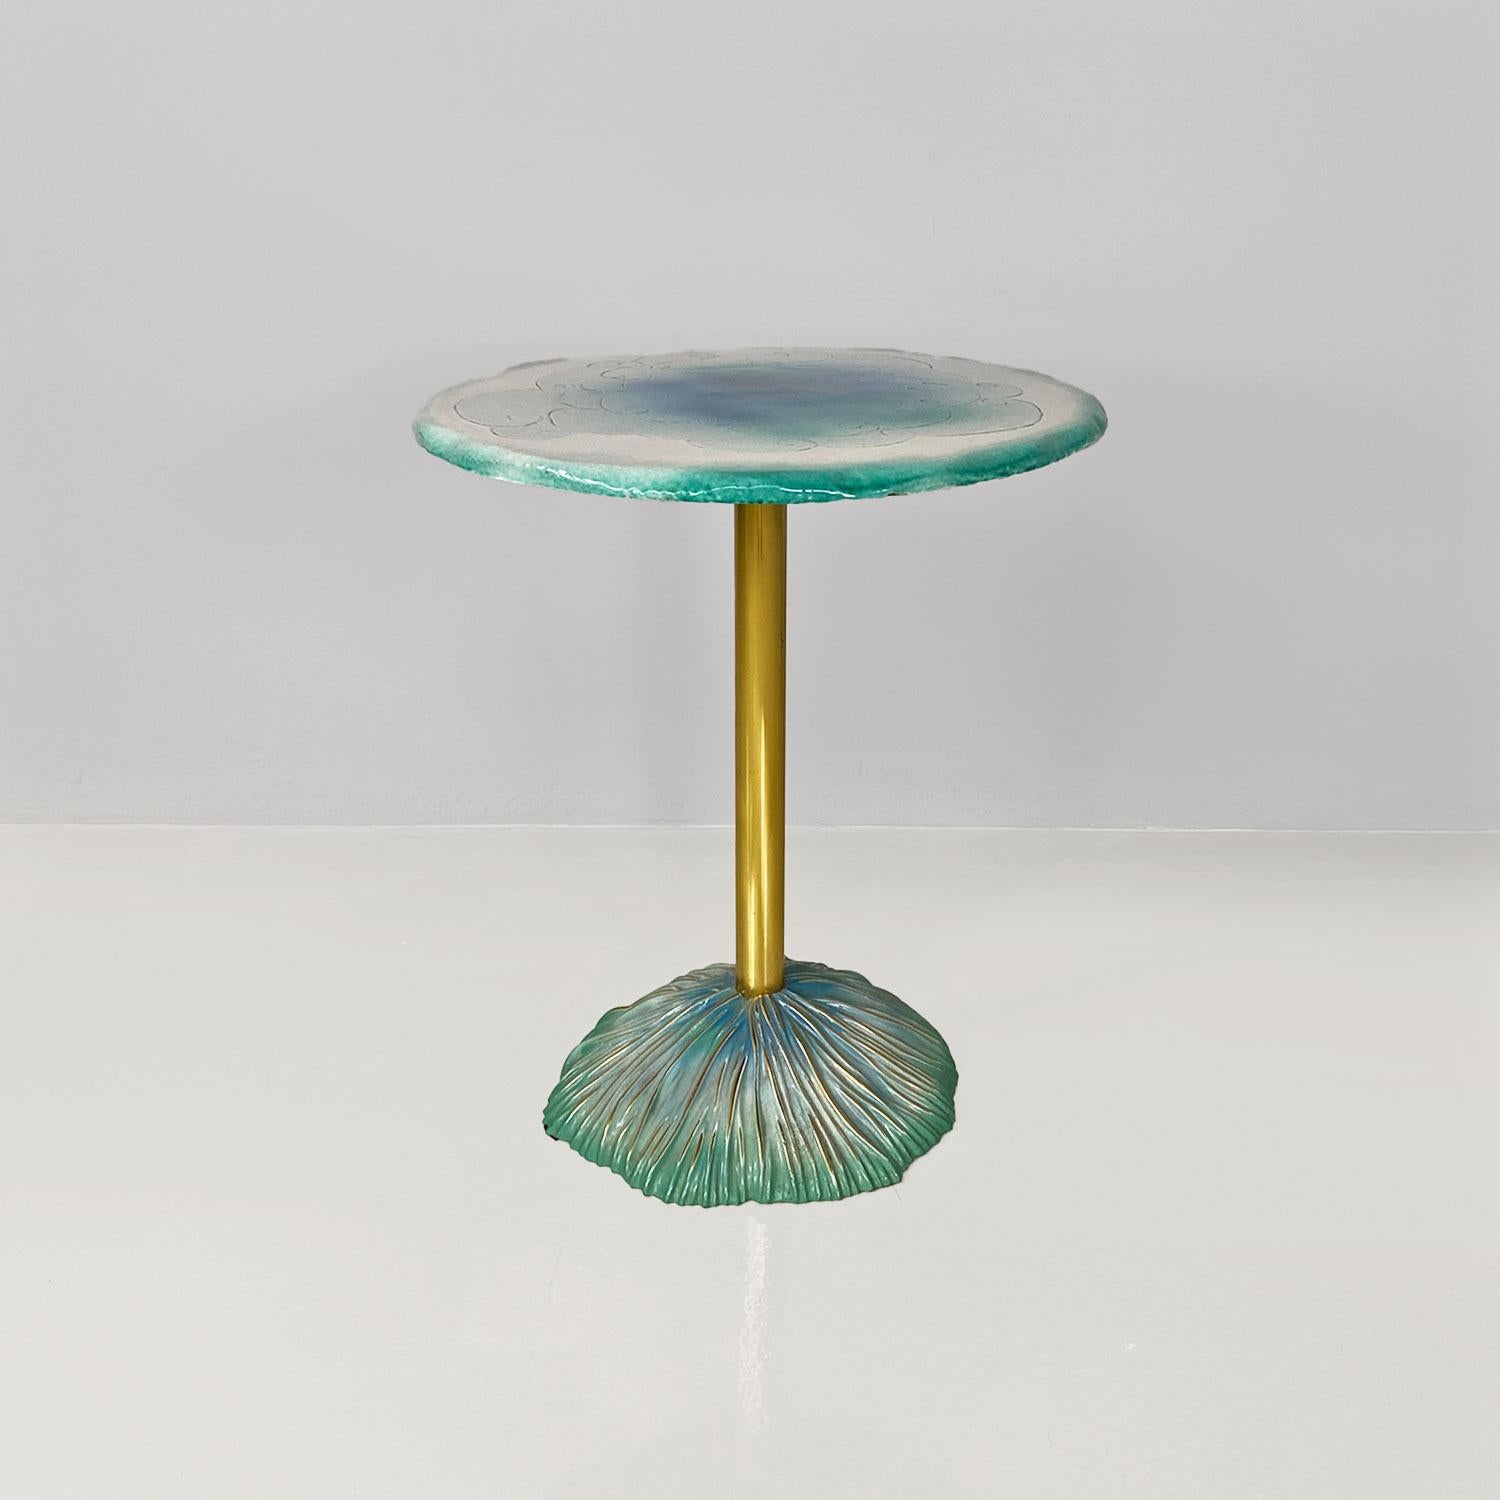 Modern Italian modern brass and ceramic dining table with engraved design, 1980s For Sale